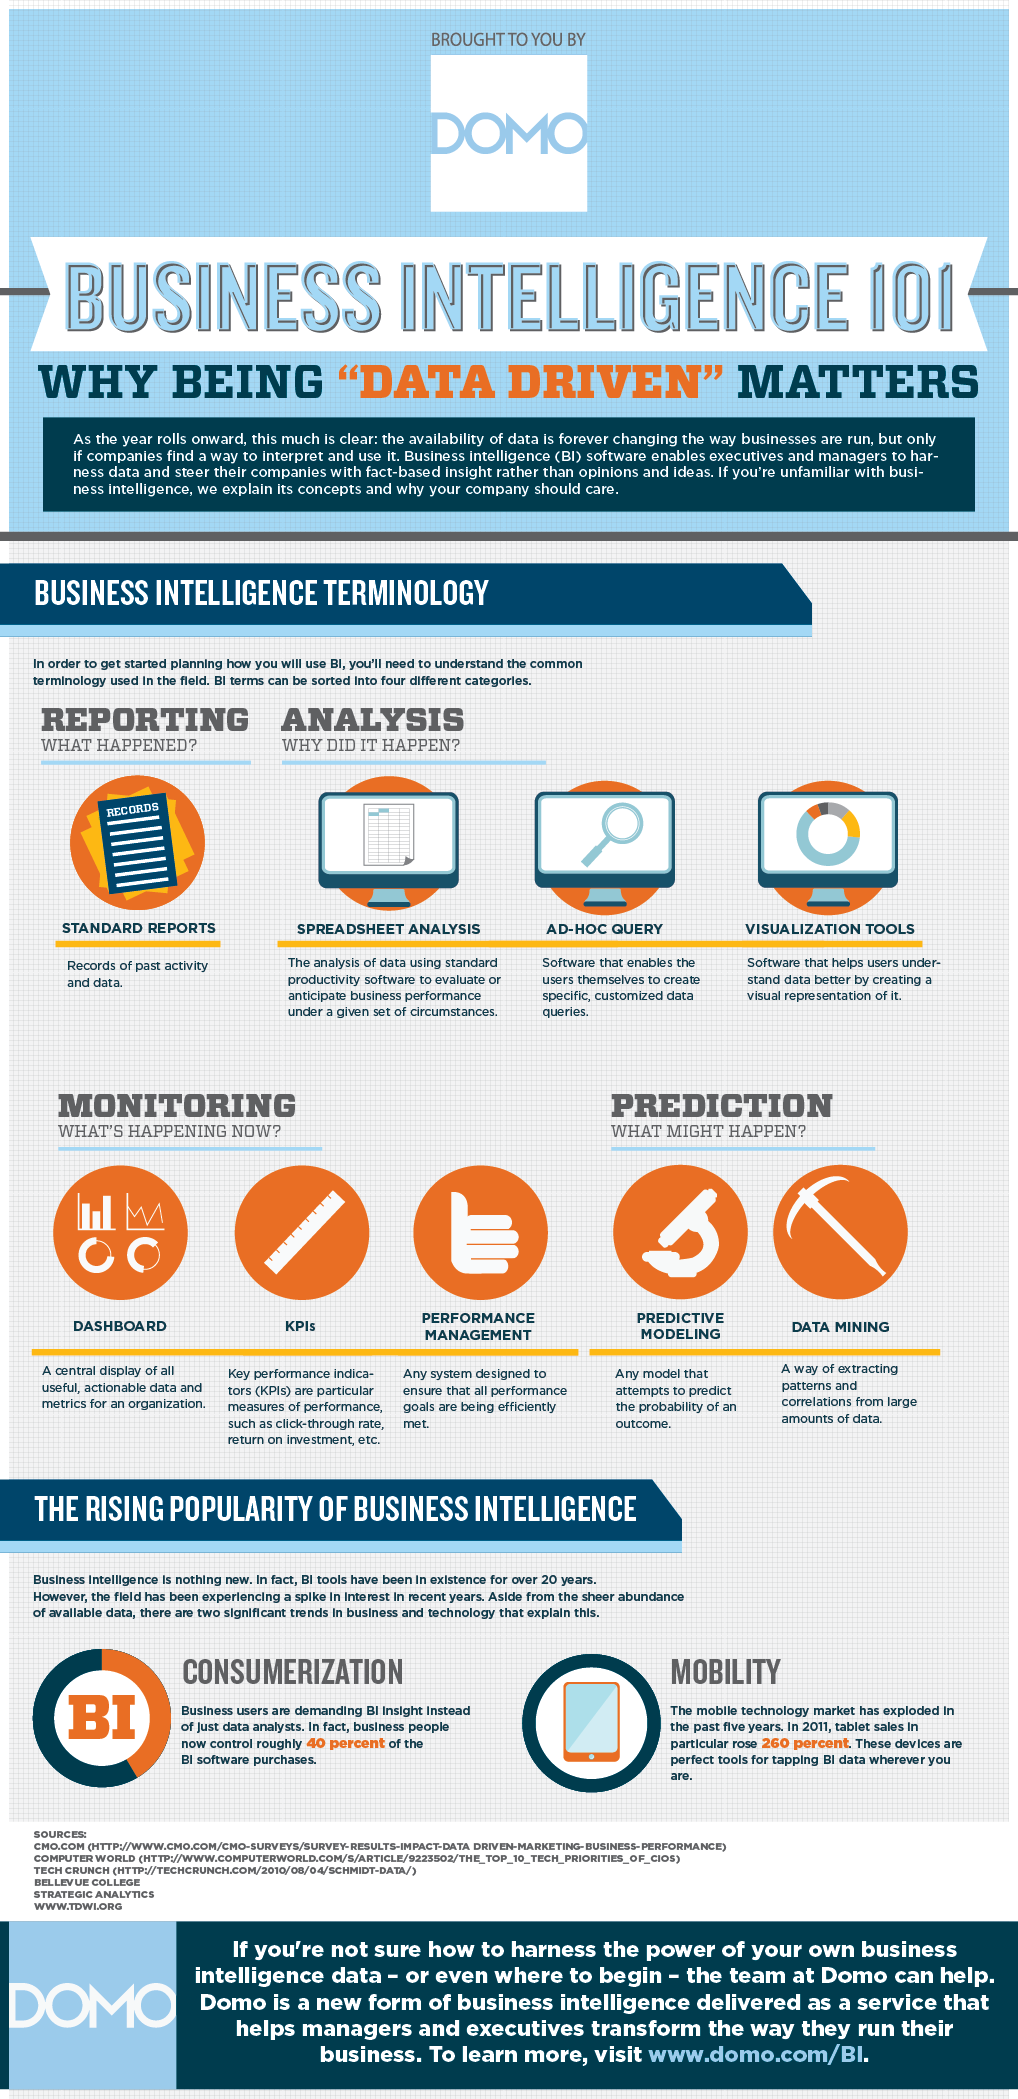 Now as an infographic: Artificial intelligence is influencing companies